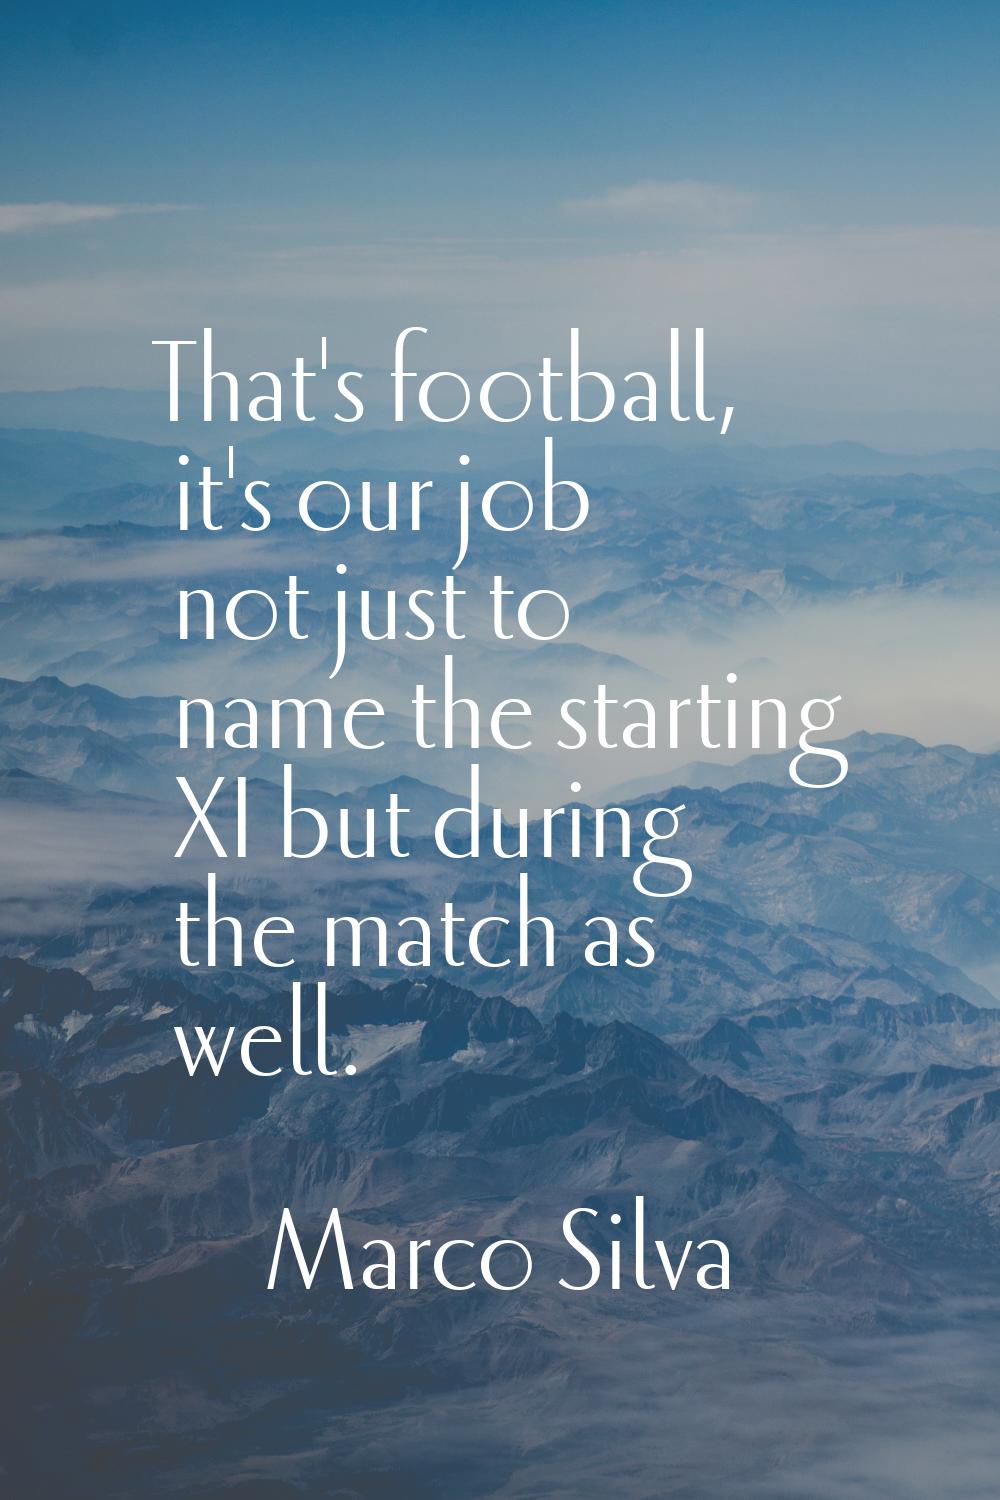 That's football, it's our job not just to name the starting XI but during the match as well.